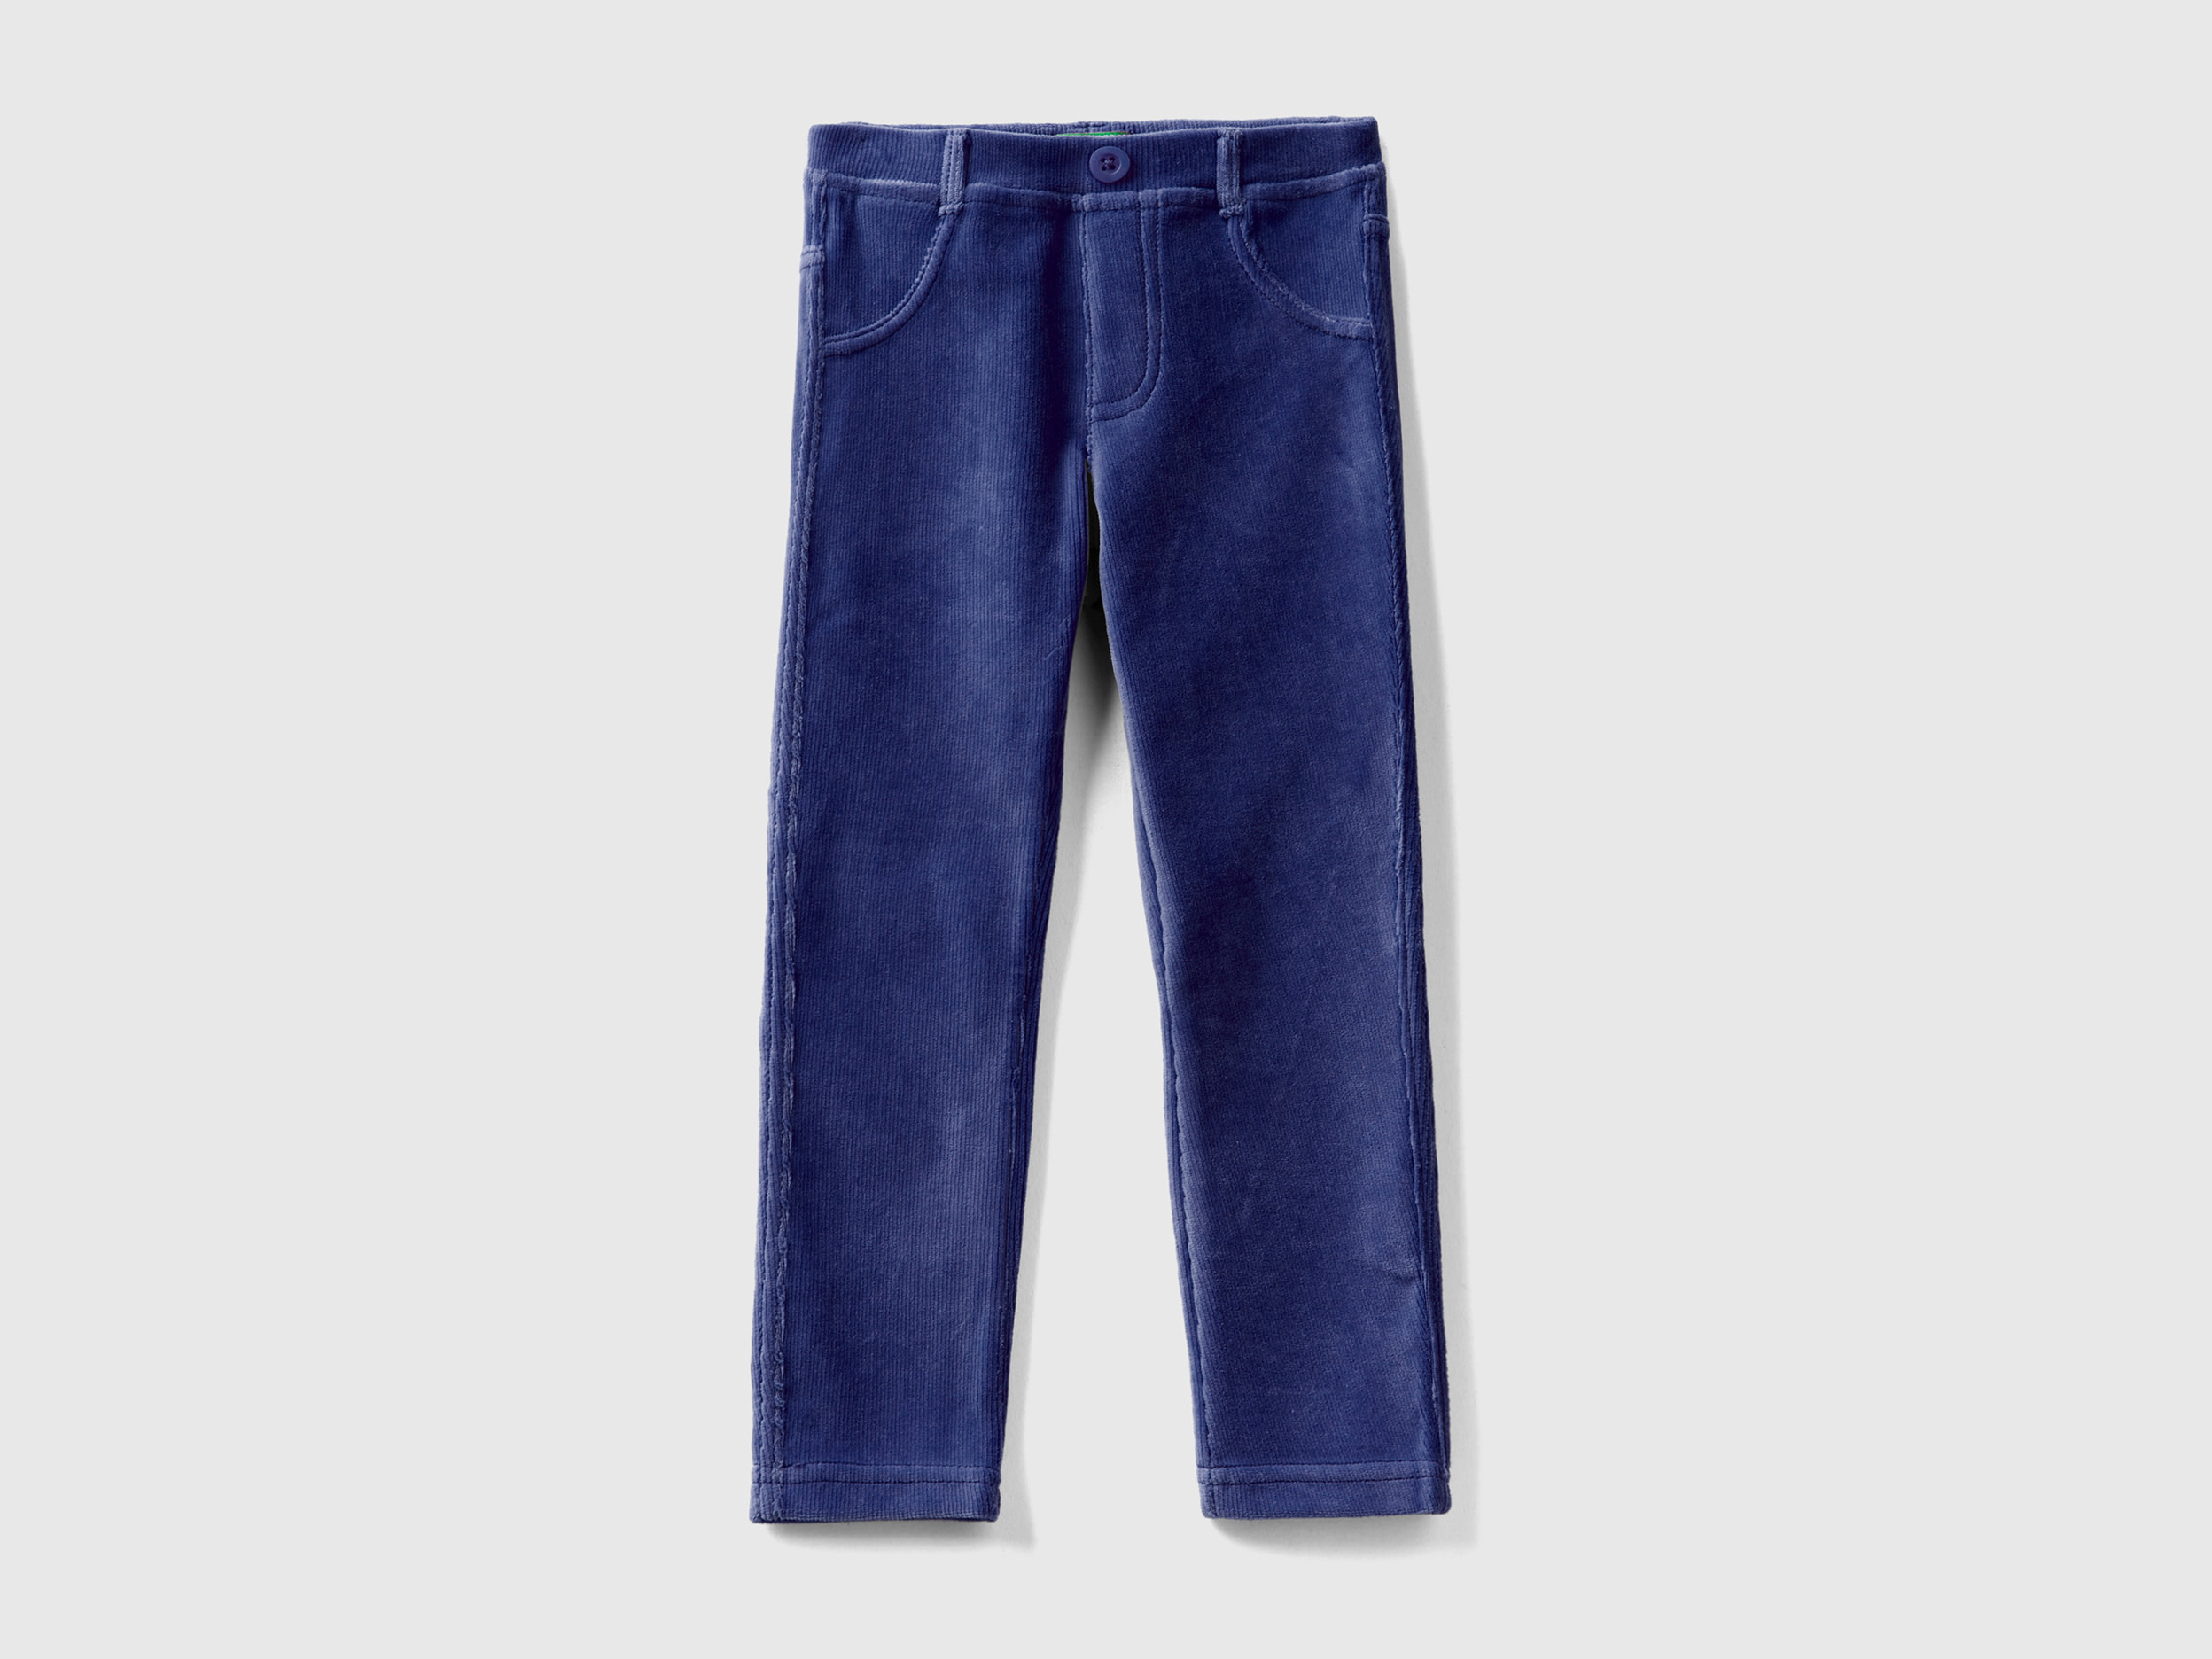 Benetton, Ribbed Chenille Trousers, size 4-5, Dark Blue, Kids